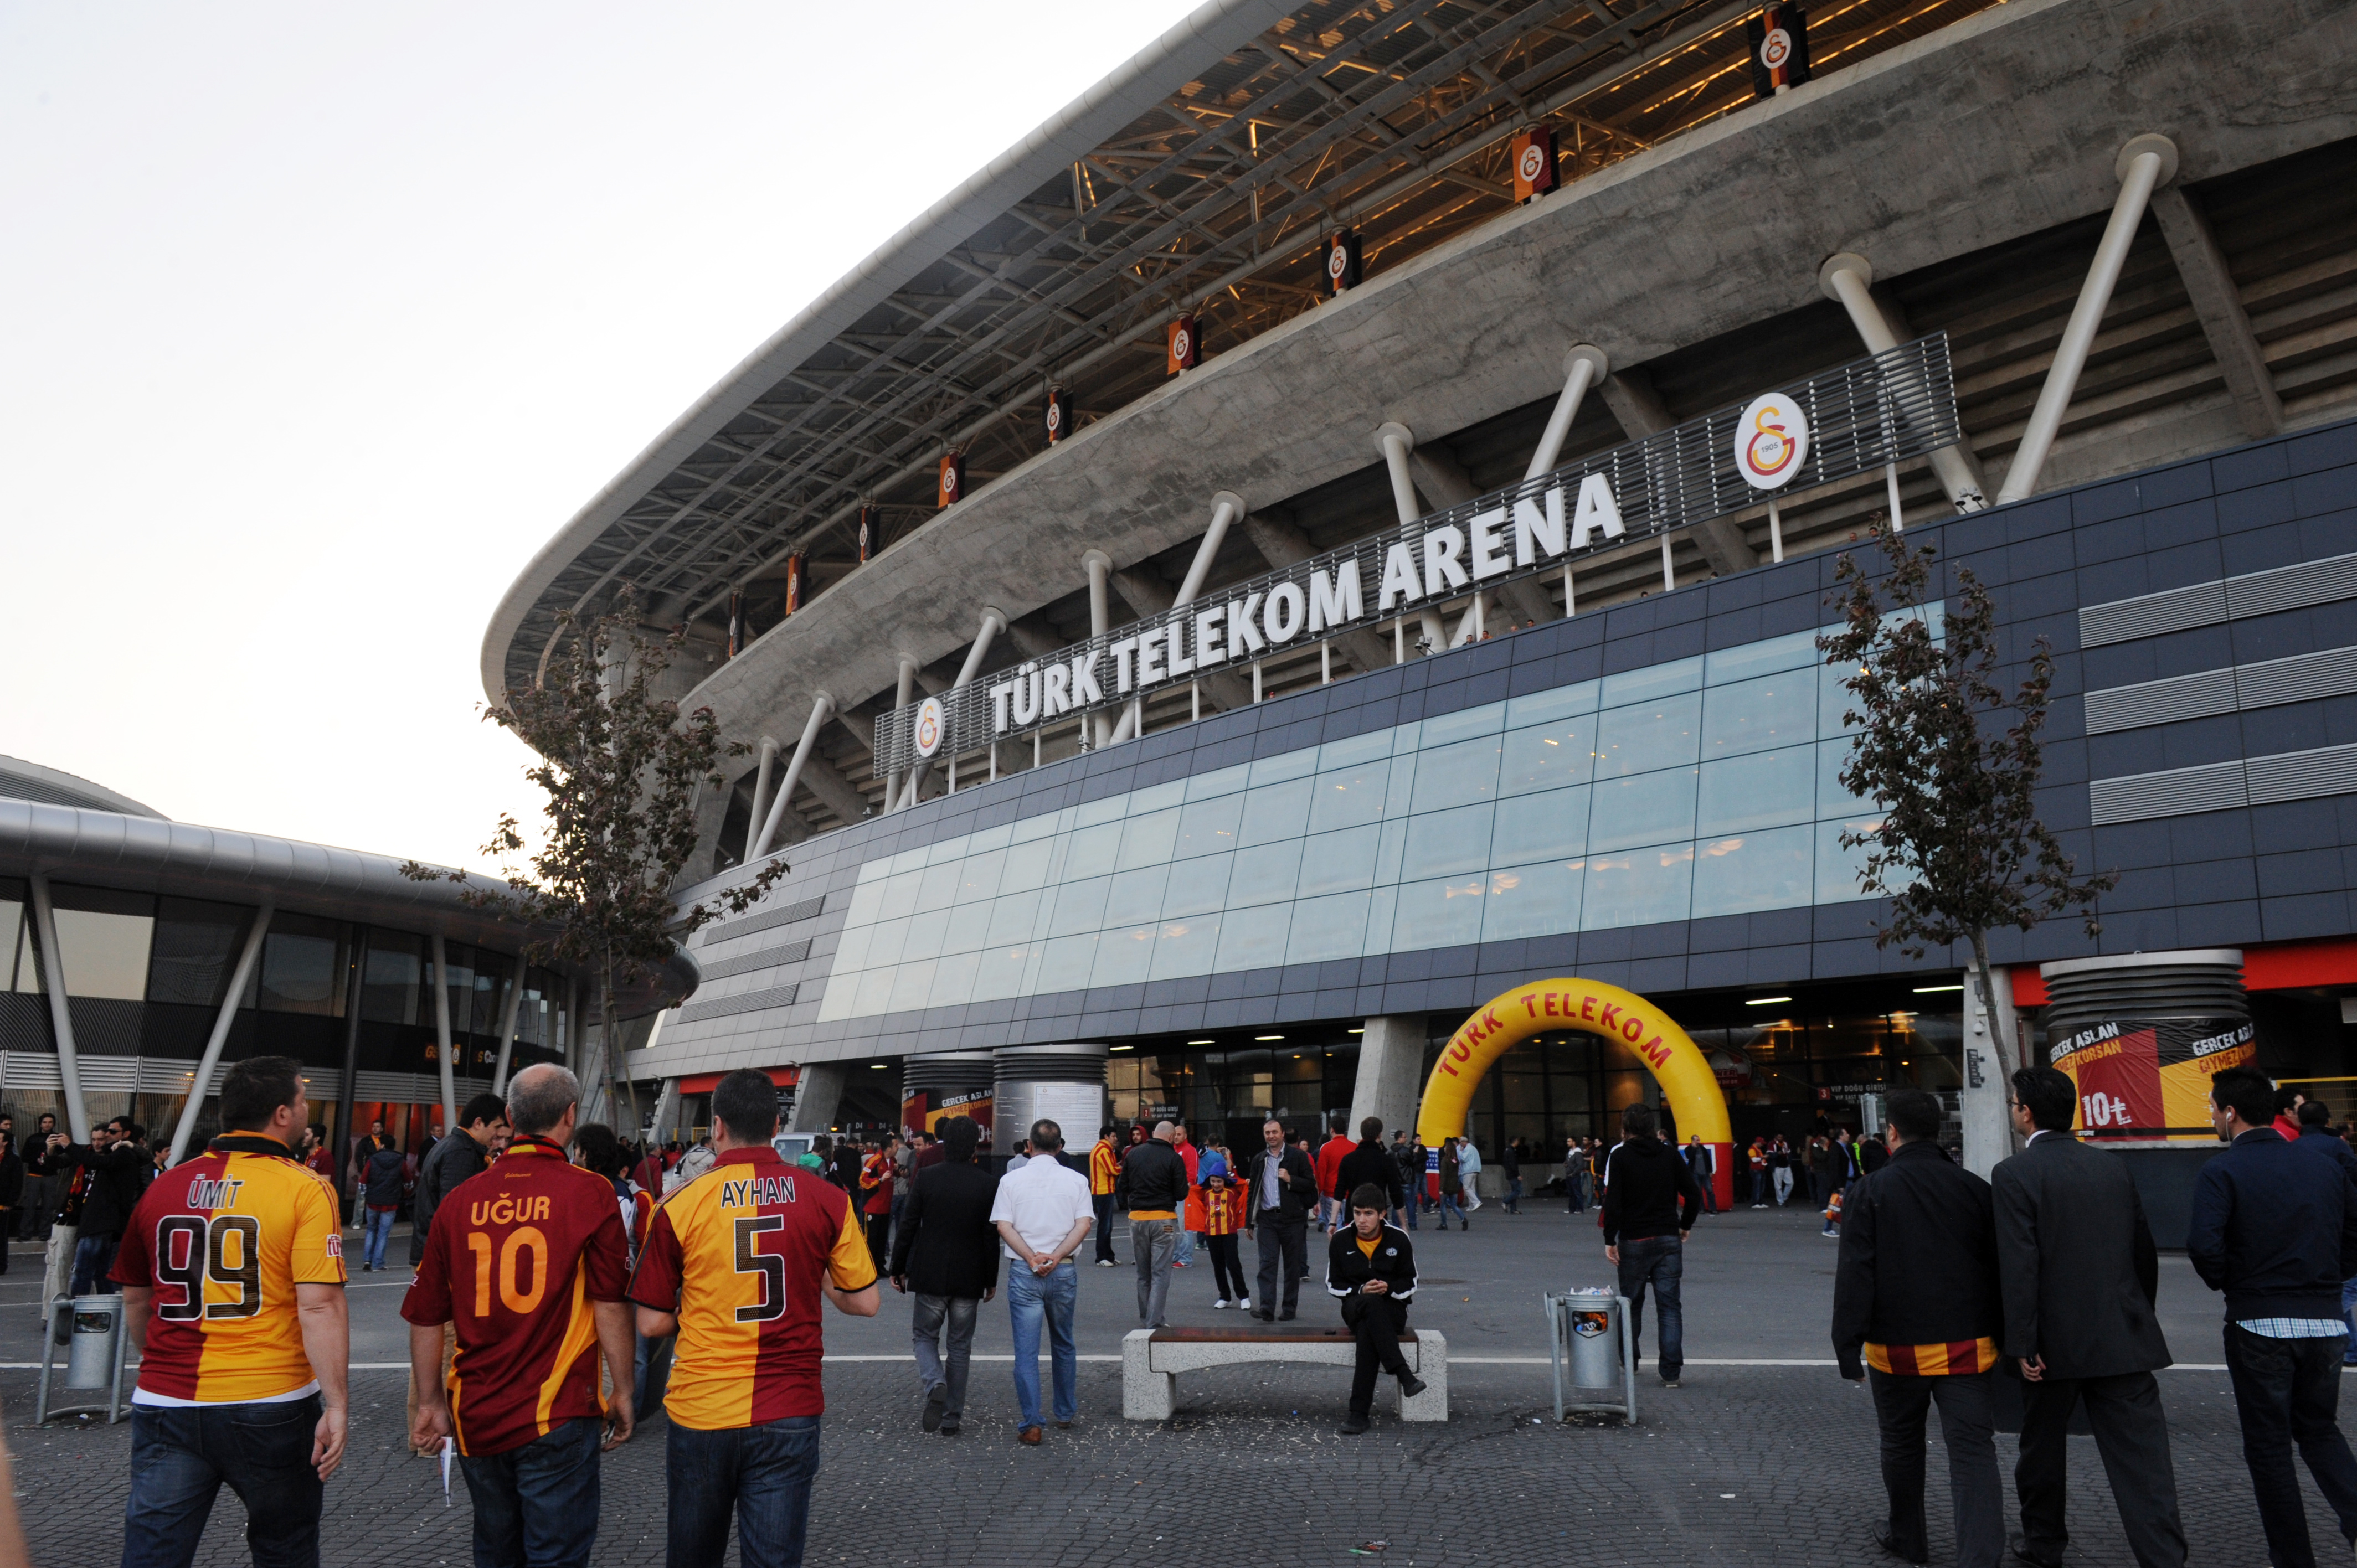 ISTANBUL;TURKEY - MAY 2:  A general view of outside the Turk Telekom Arena, home of Galatasaray FC before the Turkish Super League match between Galatasaray and Trabzonspor on May  2, 2012  in Istanbul,Turkey. (Photo by Bulent Kilic/EuroFootball/Getty Images)